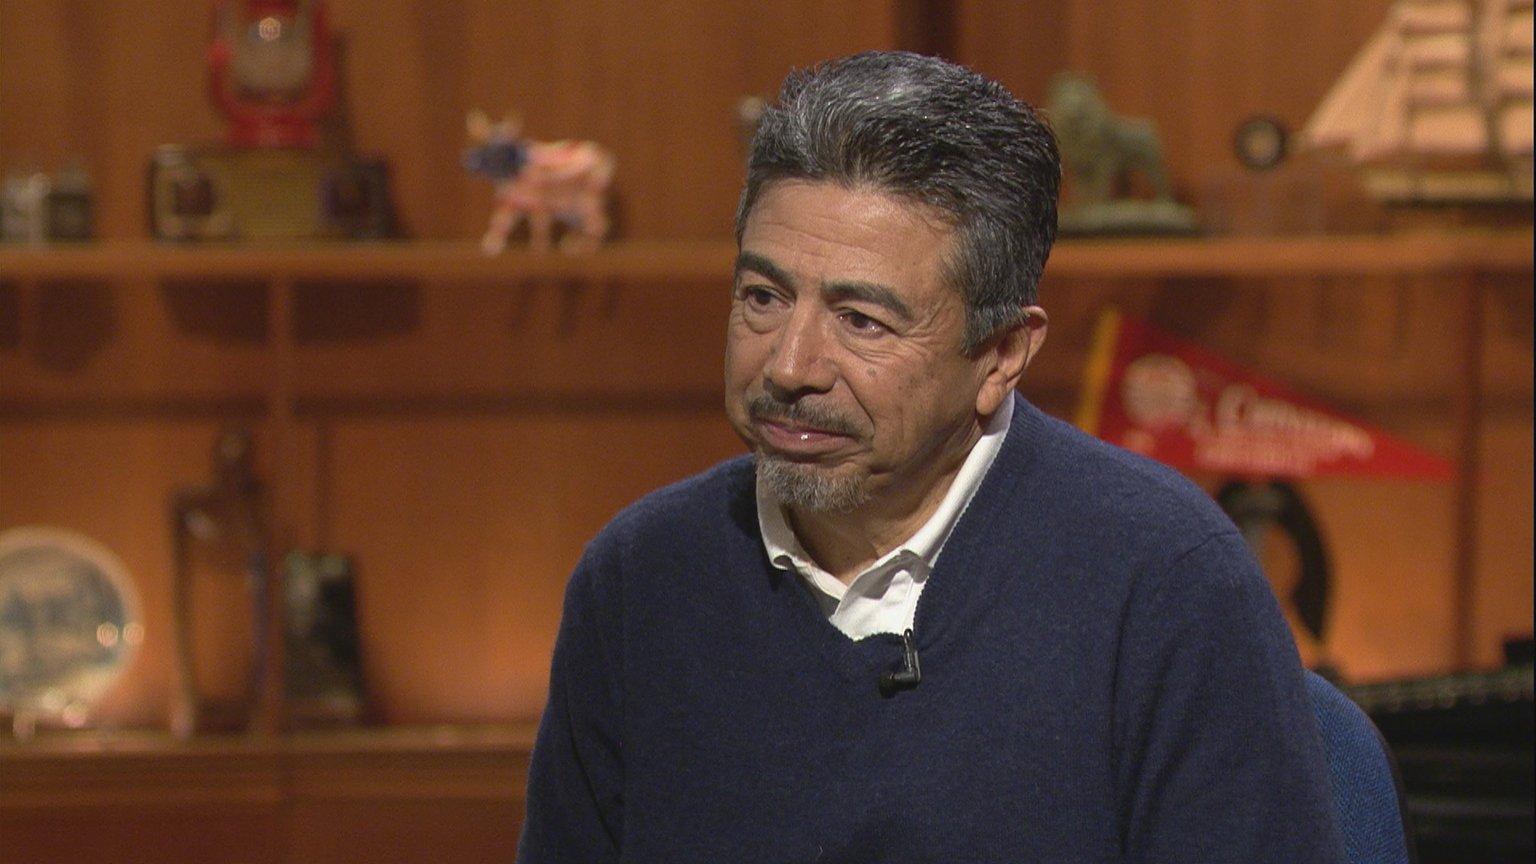 Ald. Danny Solis (25th Ward) appears on “Chicago Tonight” on Nov. 26, 2018. (WTTW News)